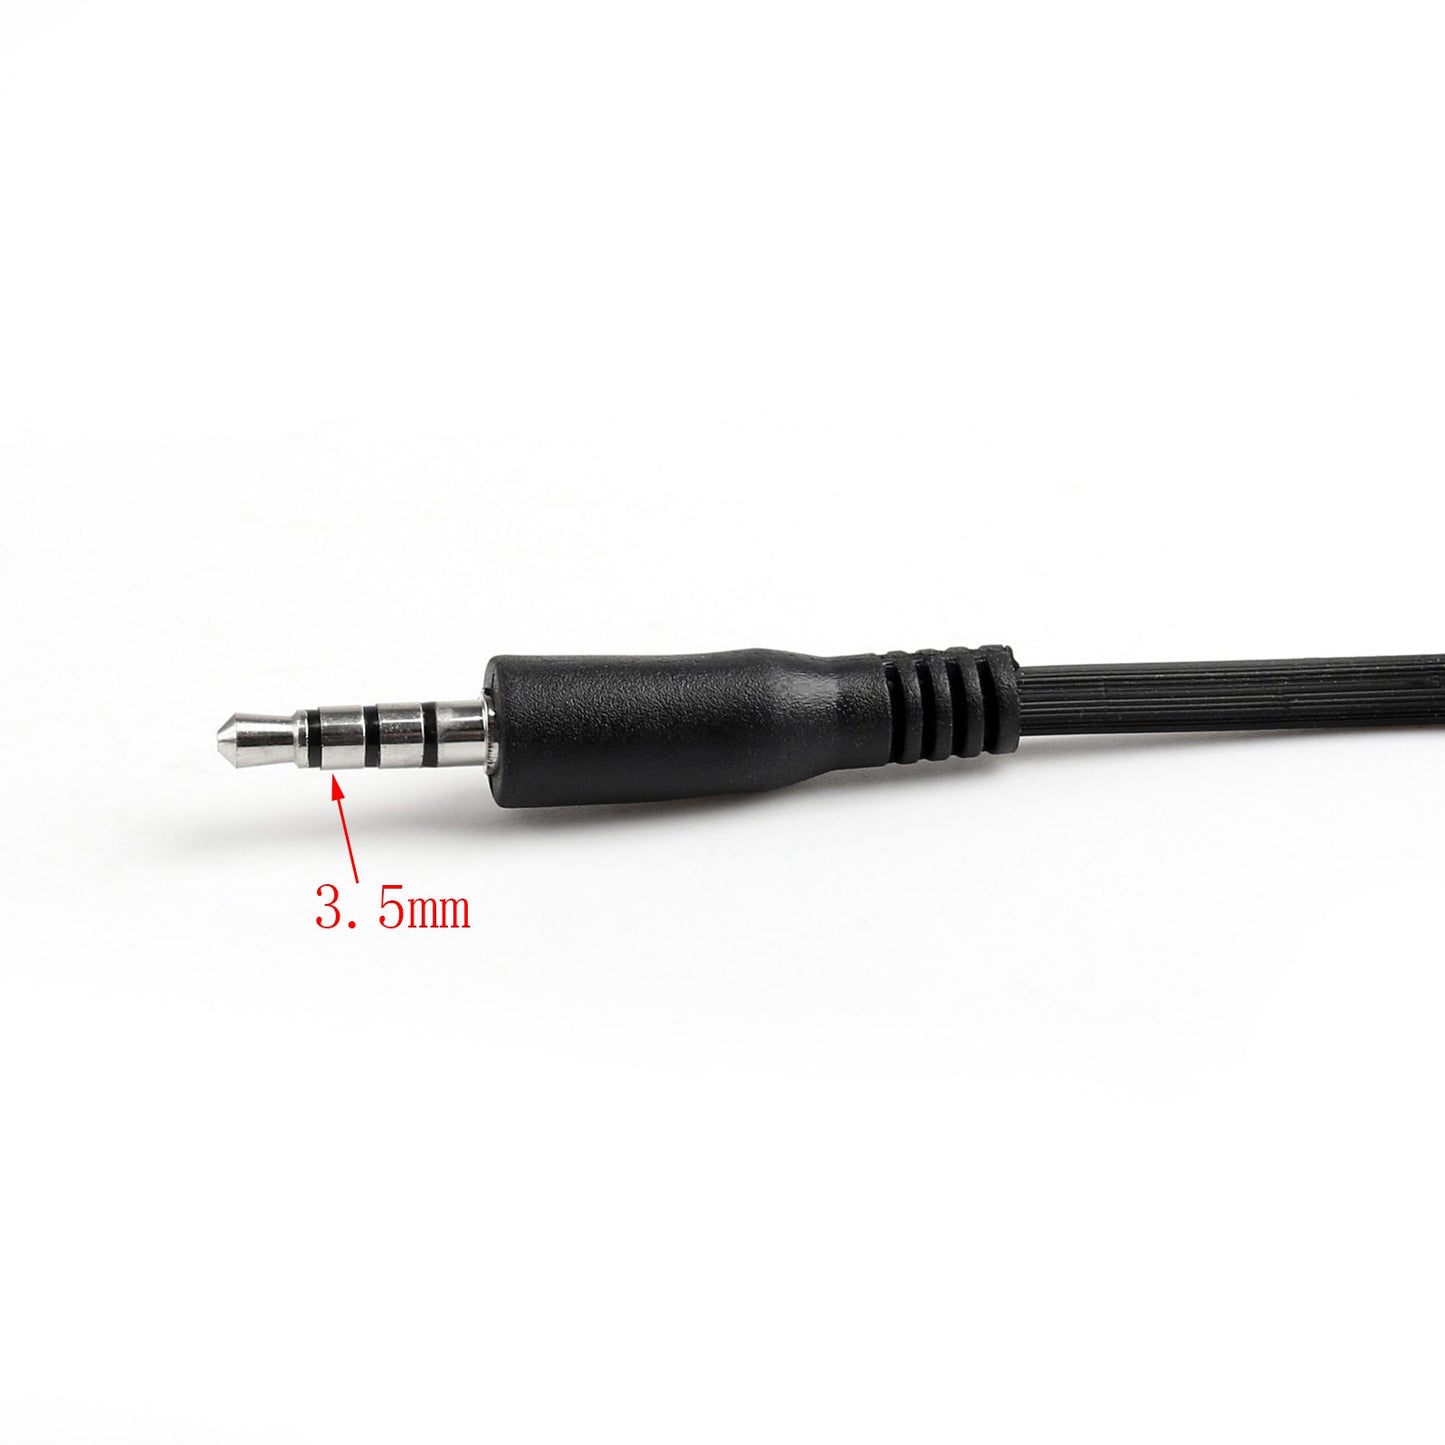 1Pcs 3.5mm Z Tactical TCI Headset Earphone PTT For Samsung iPhone Mobile Phone